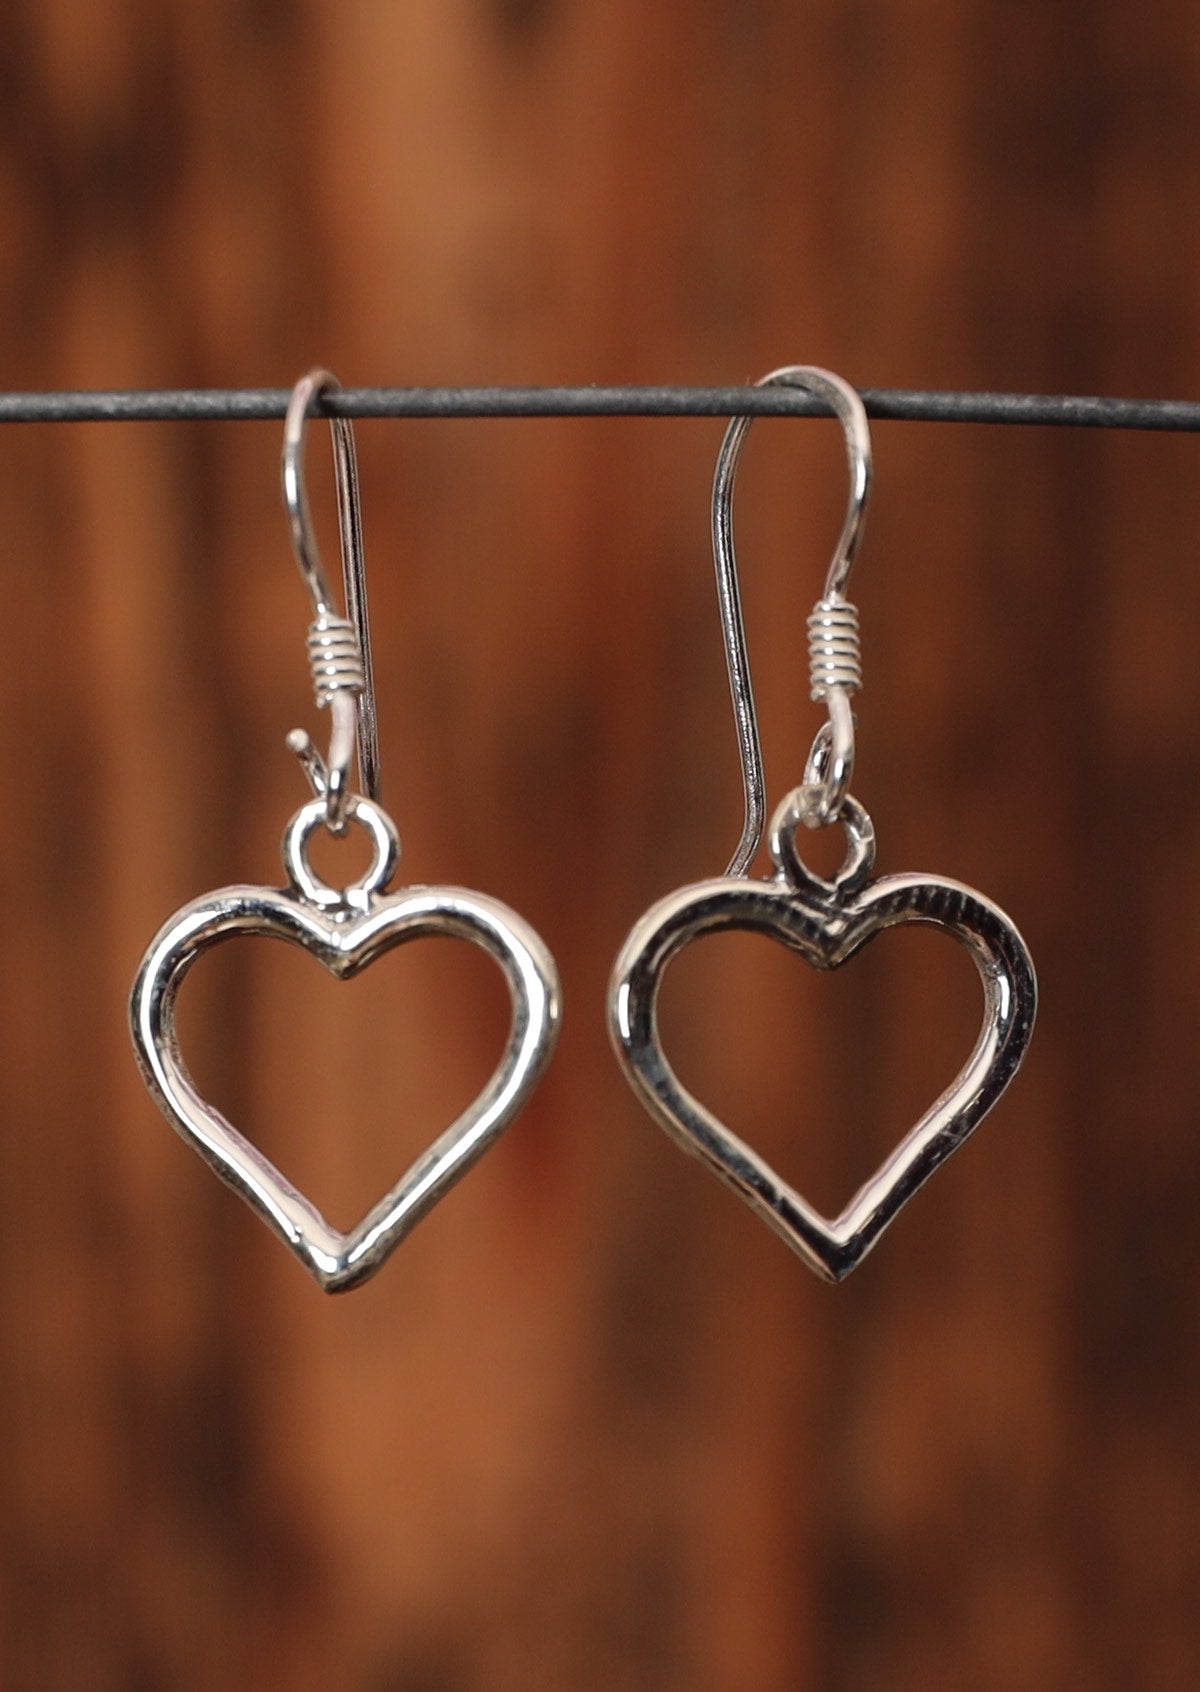 92.5% silver heart shaped earrings with hooks on a wire for display.